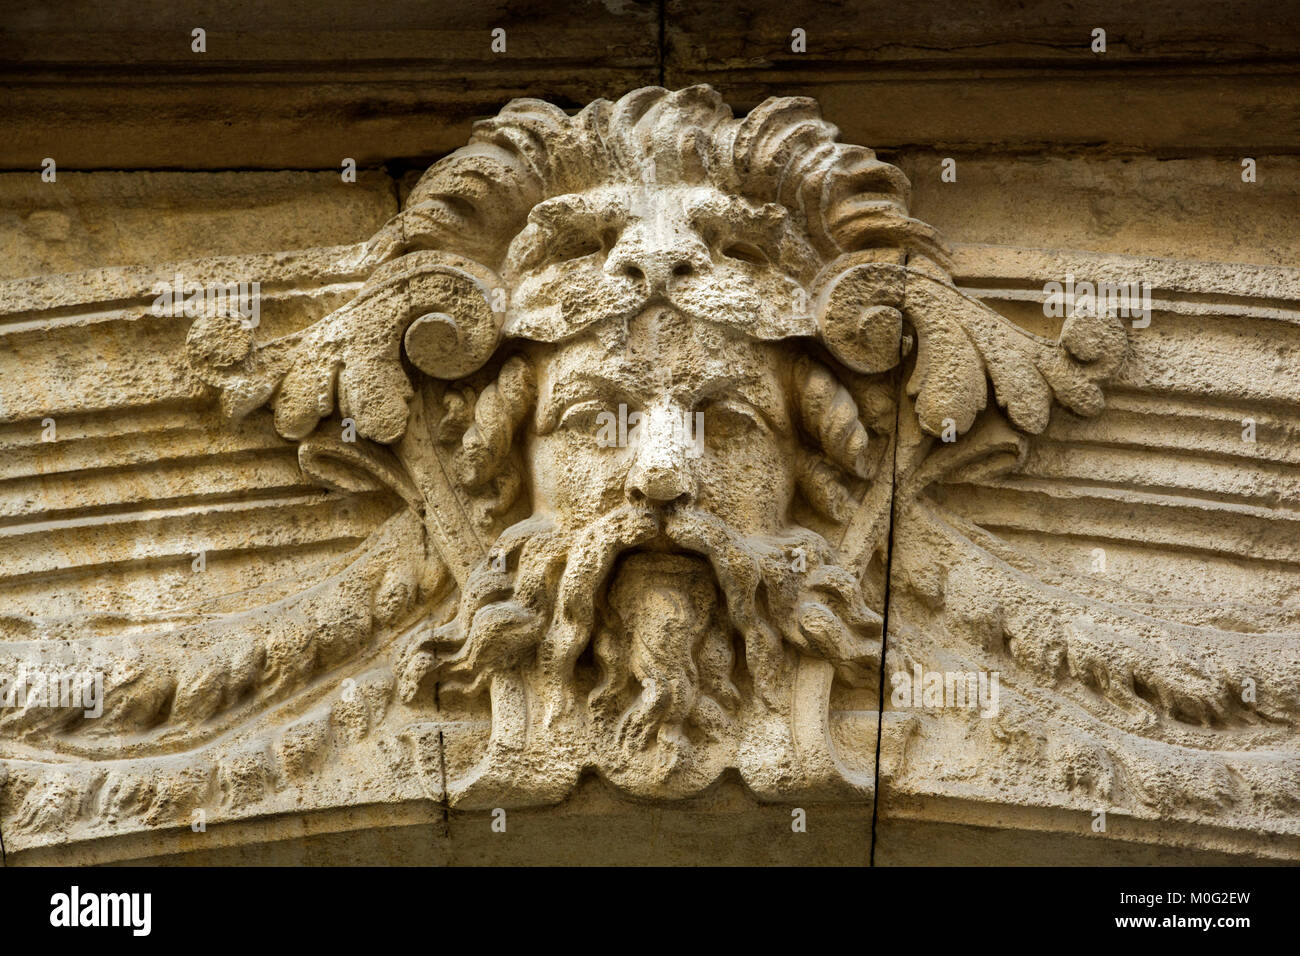 Grand Rue, Nimes, Gard, Occitanie, France - Architectural details on a facade. The building is dated 17th century Stock Photo